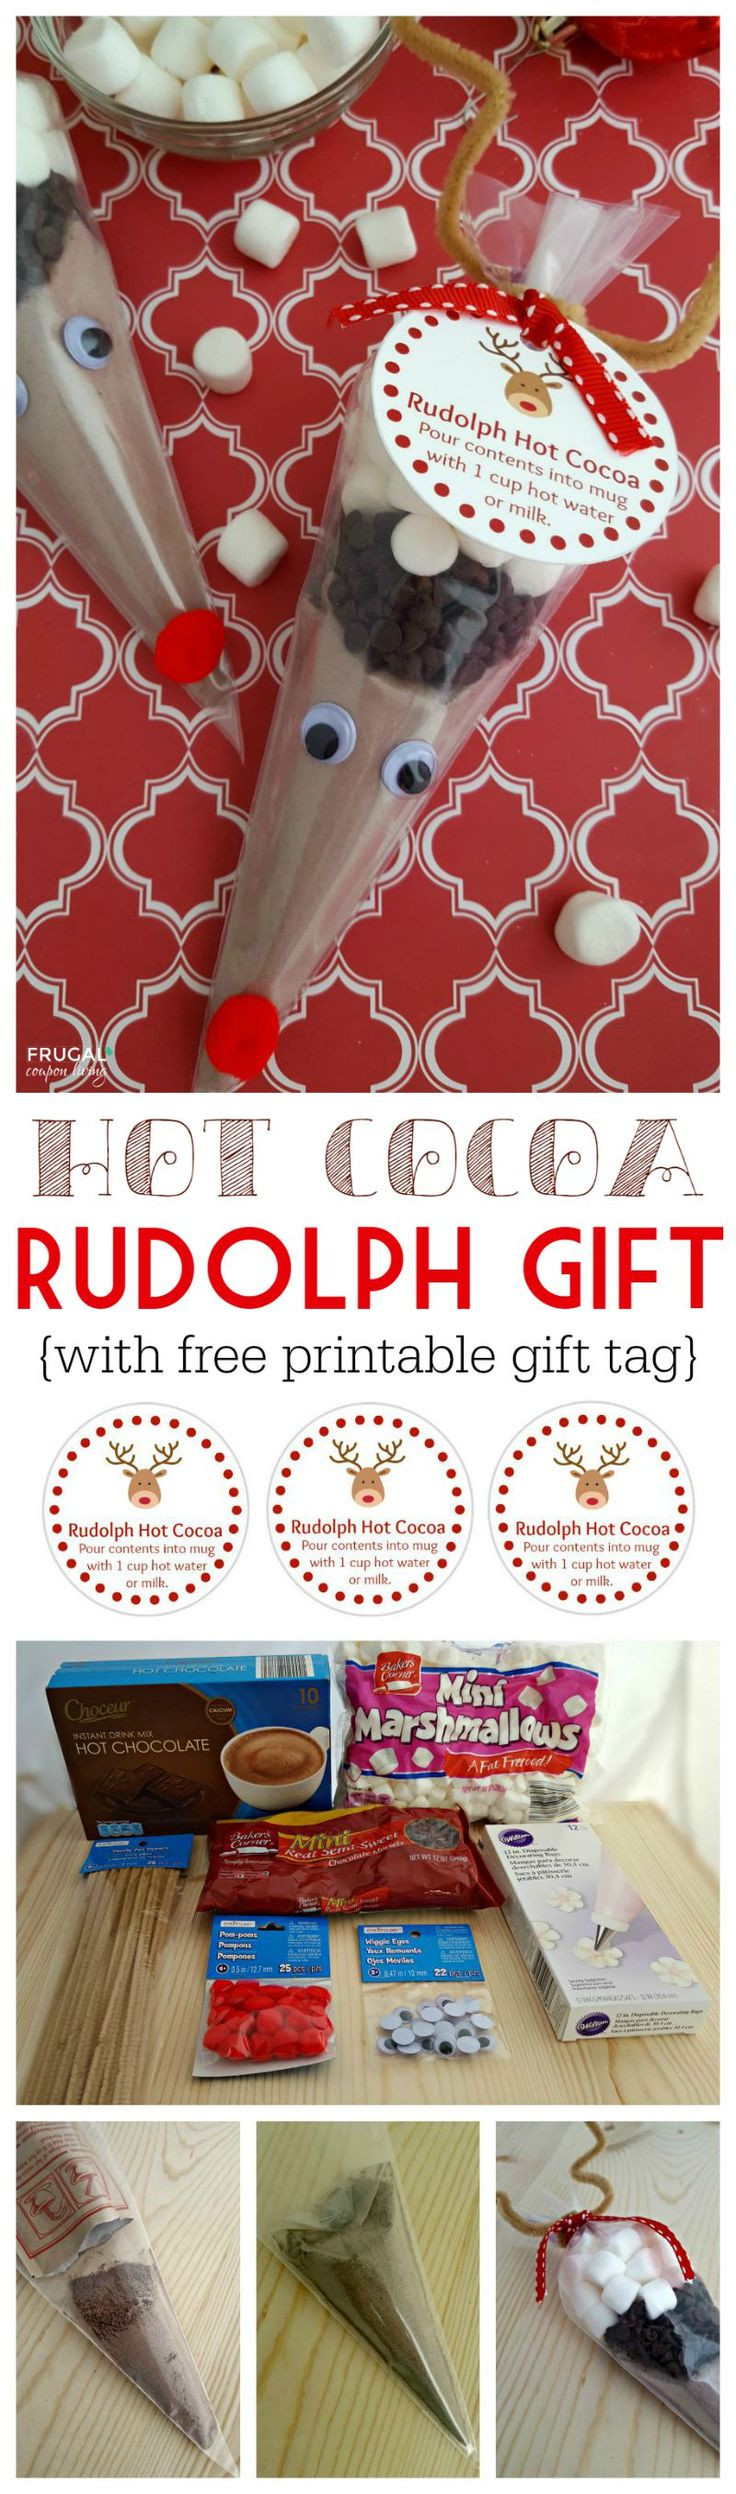 Kids Cooking Gift Ideas
 Rudolph Hot Cocoa FREE Printable Gift Tag Recipe